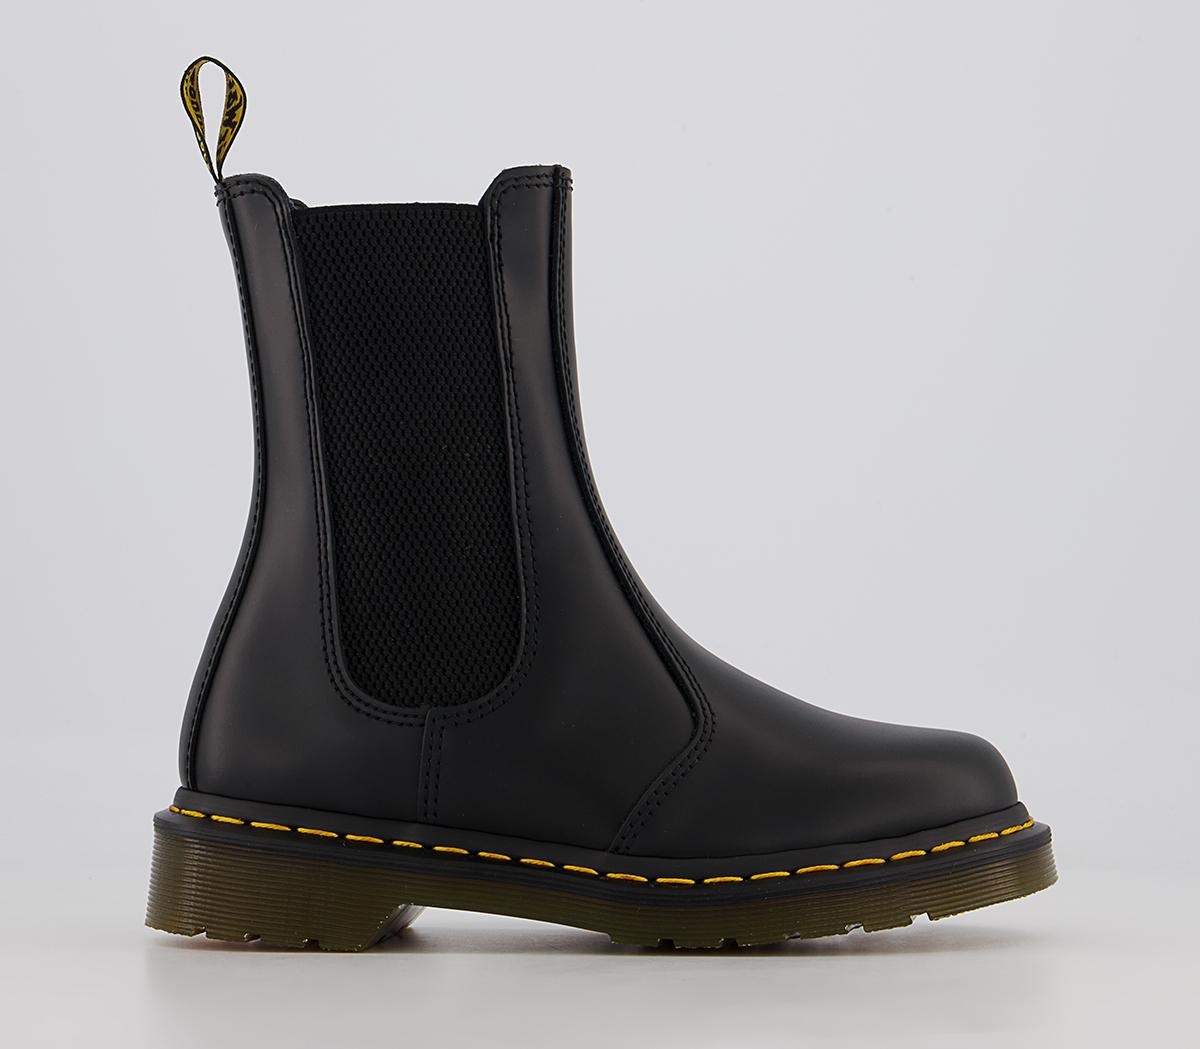 Dr. Martens 2976 Hi Chelsea Boots Black Smooth - Women's Ankle Boots